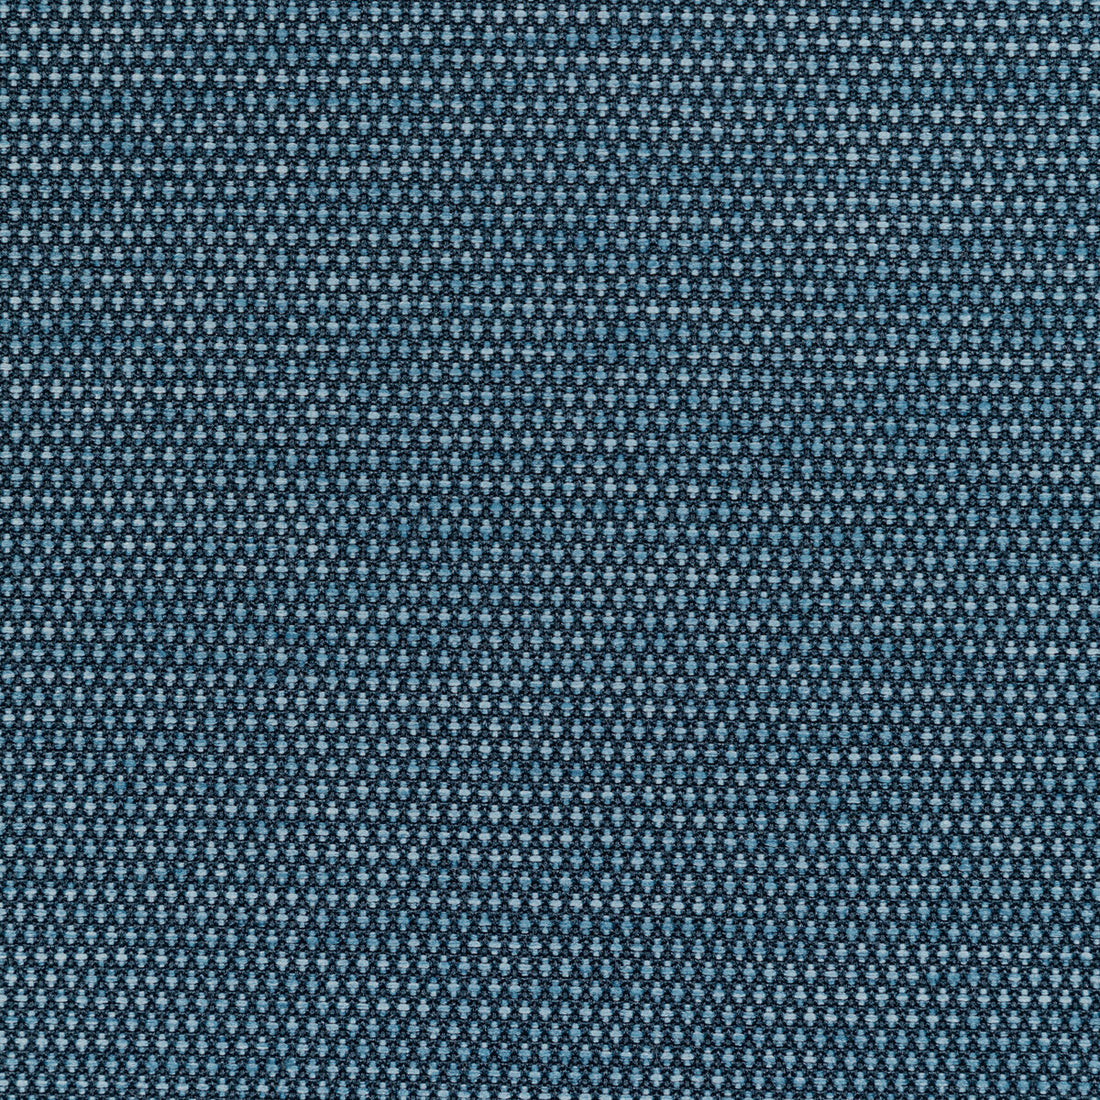 Mobilize fabric in bimini color - pattern 36256.5.0 - by Kravet Contract in the Supreen collection